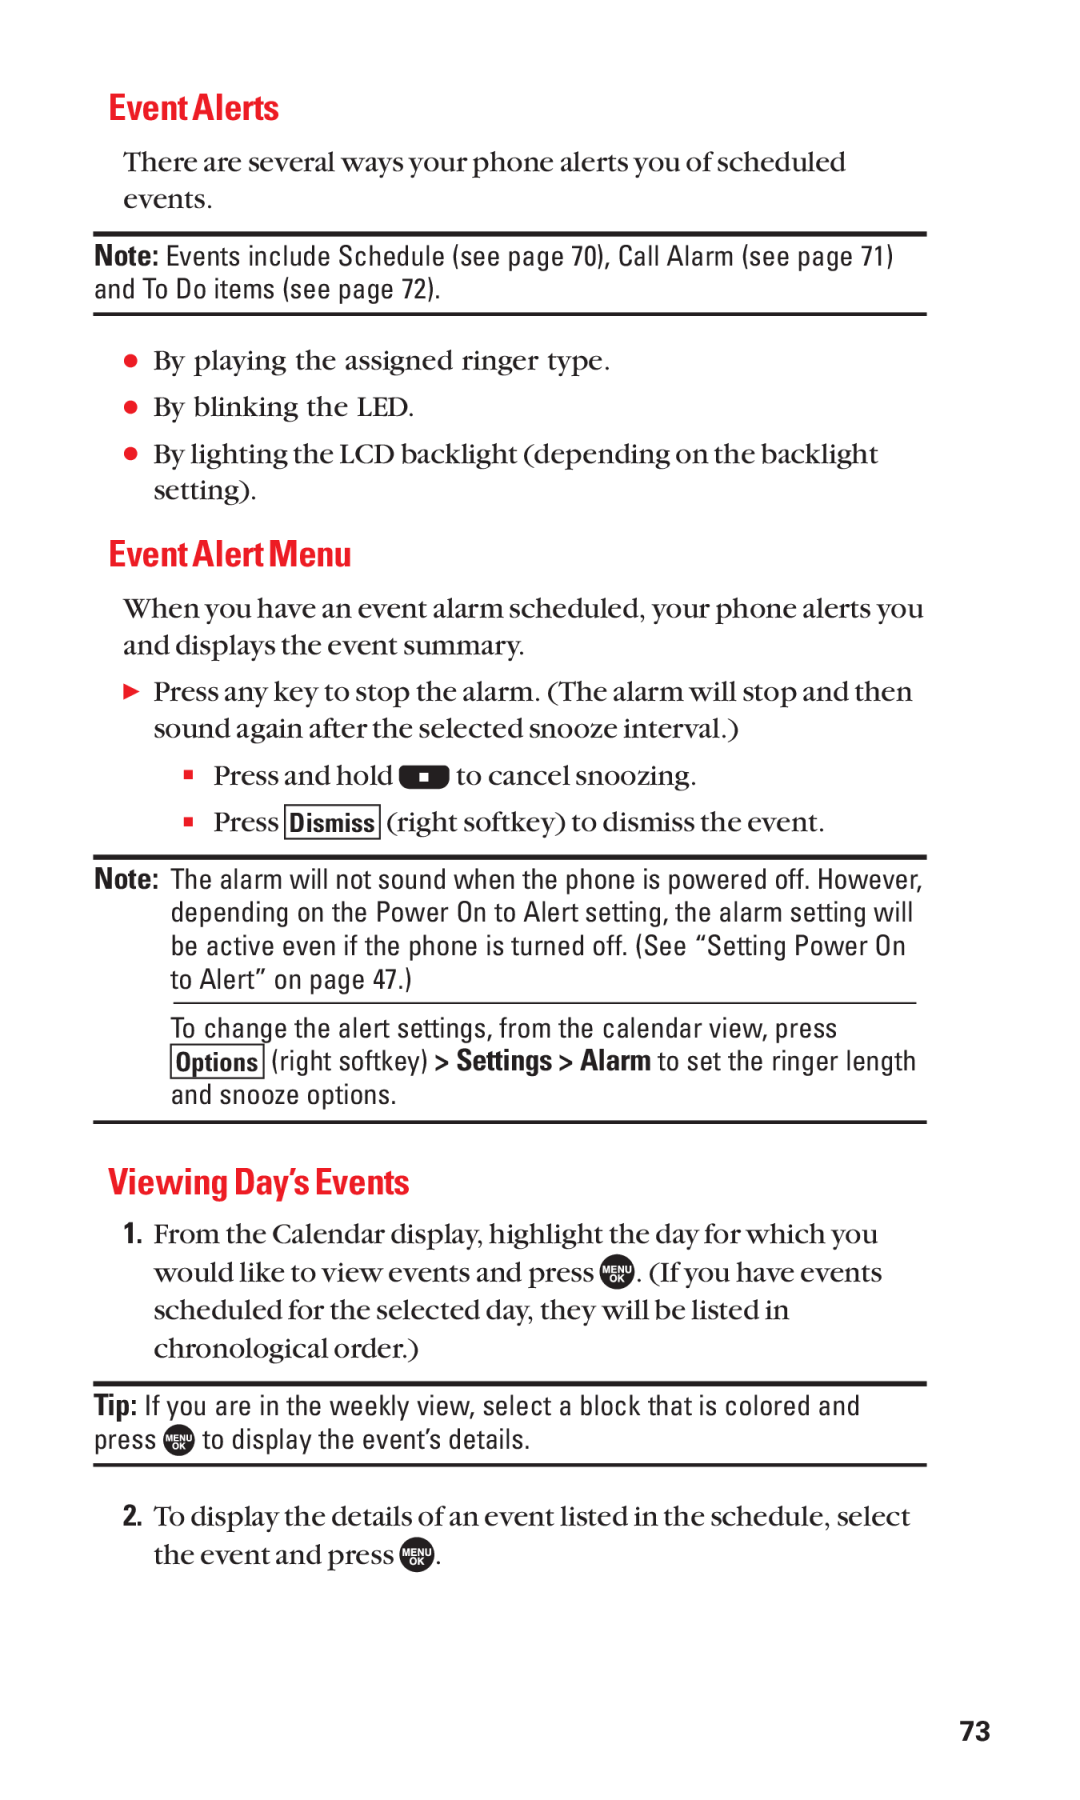 Sanyo SCP-7050 manual Event Alerts, Event Alert Menu, Viewing Day’s Events 